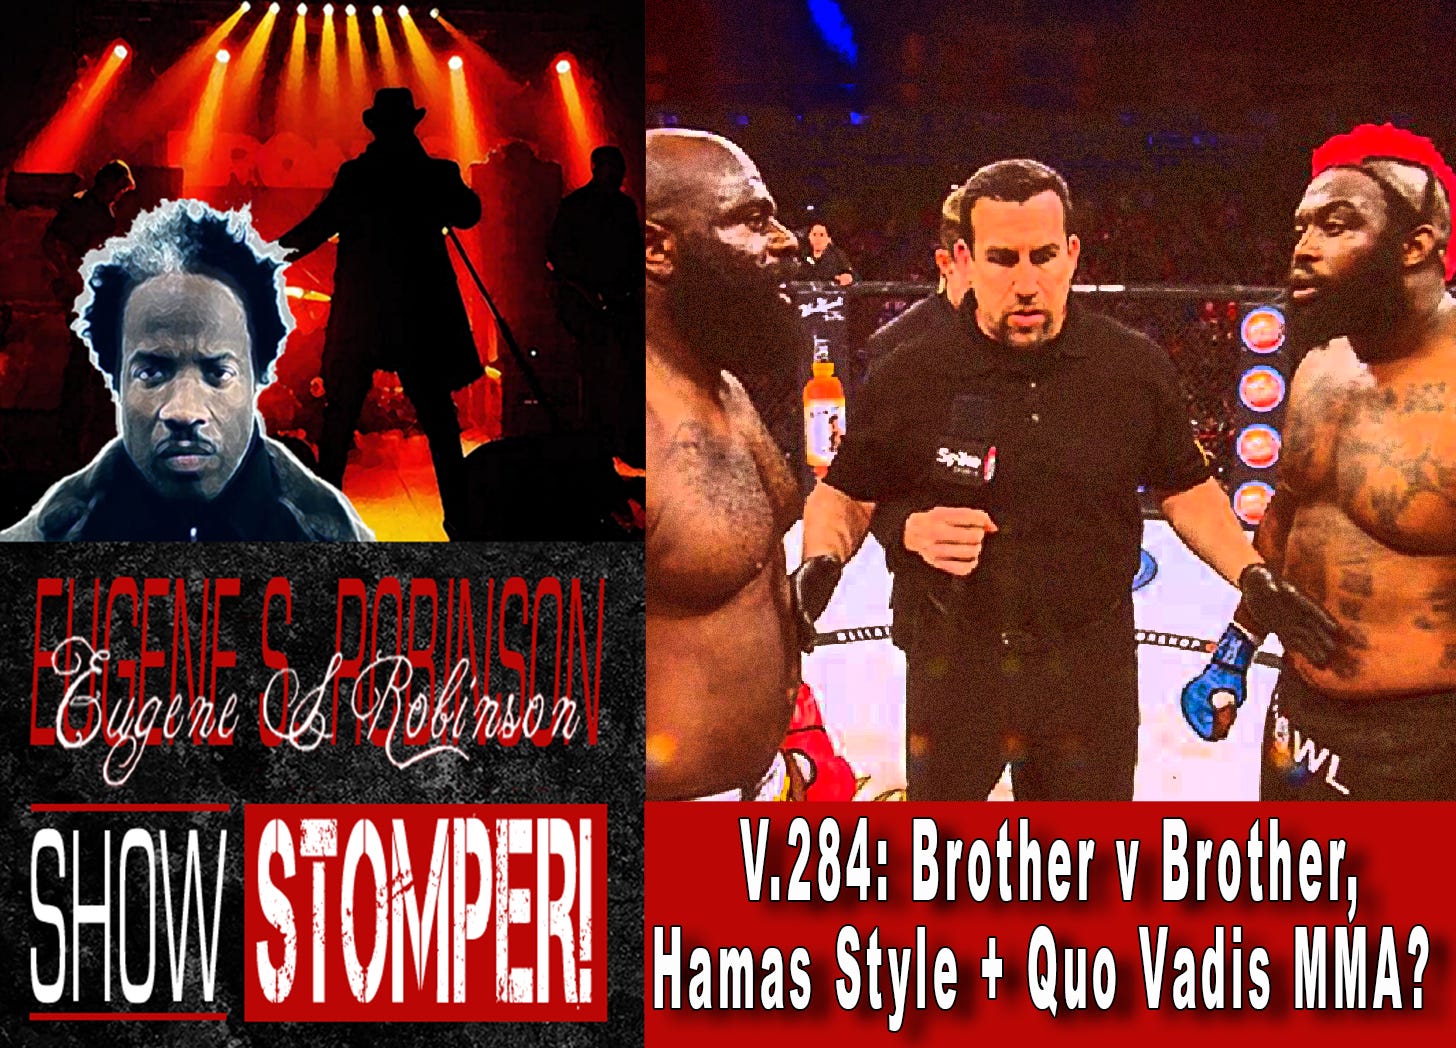 V.284: Brother v Brother, Hamas Style + Quo Vadis MMA? on The Eugene S. Robinson Show Stomper!